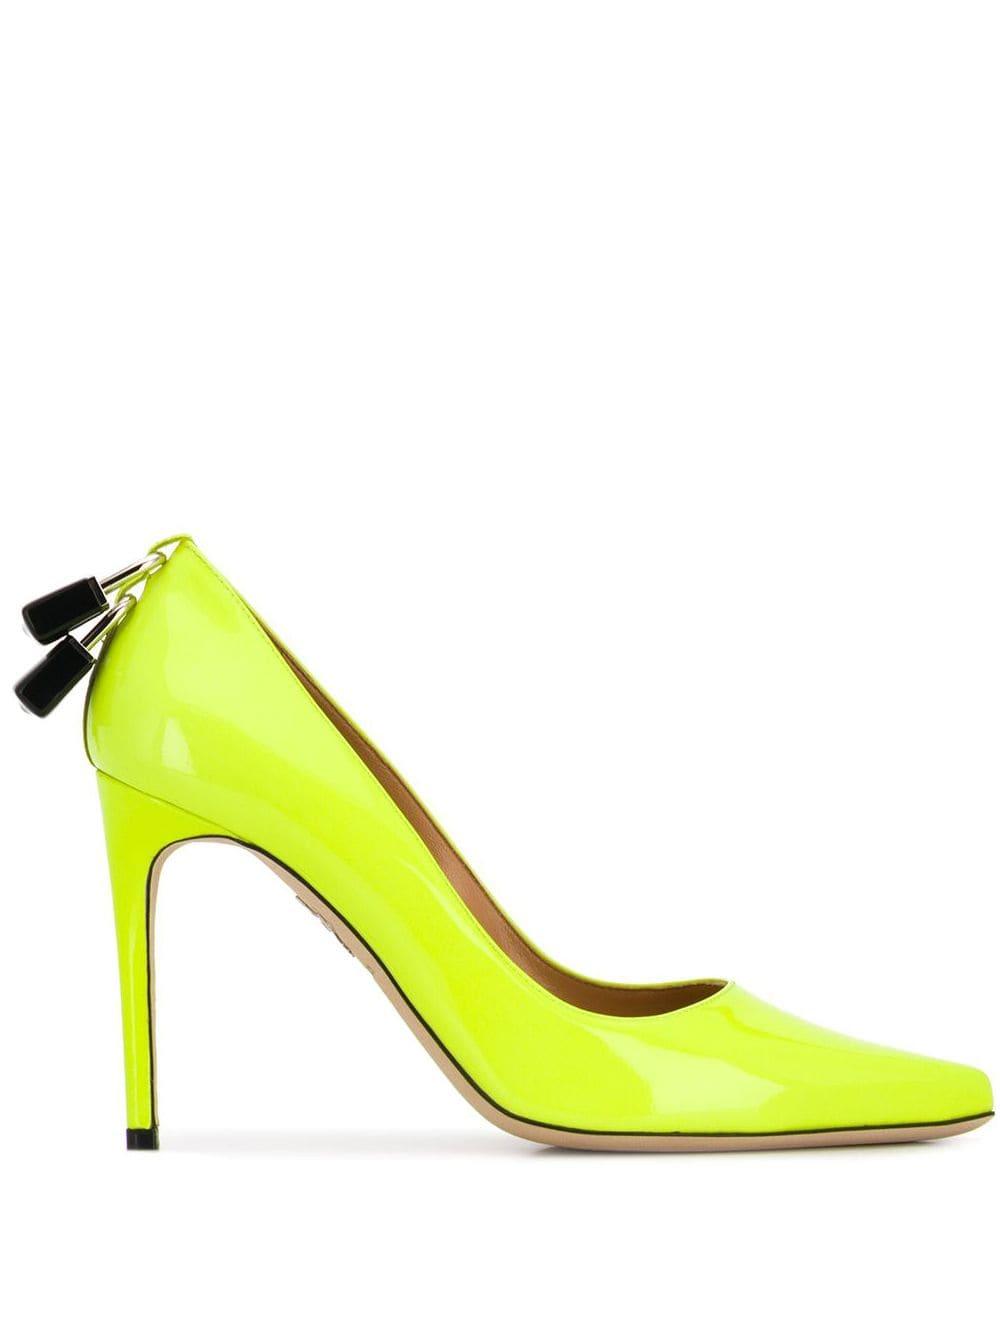 DSquared² Leather Lock Pumps in Yellow - Lyst